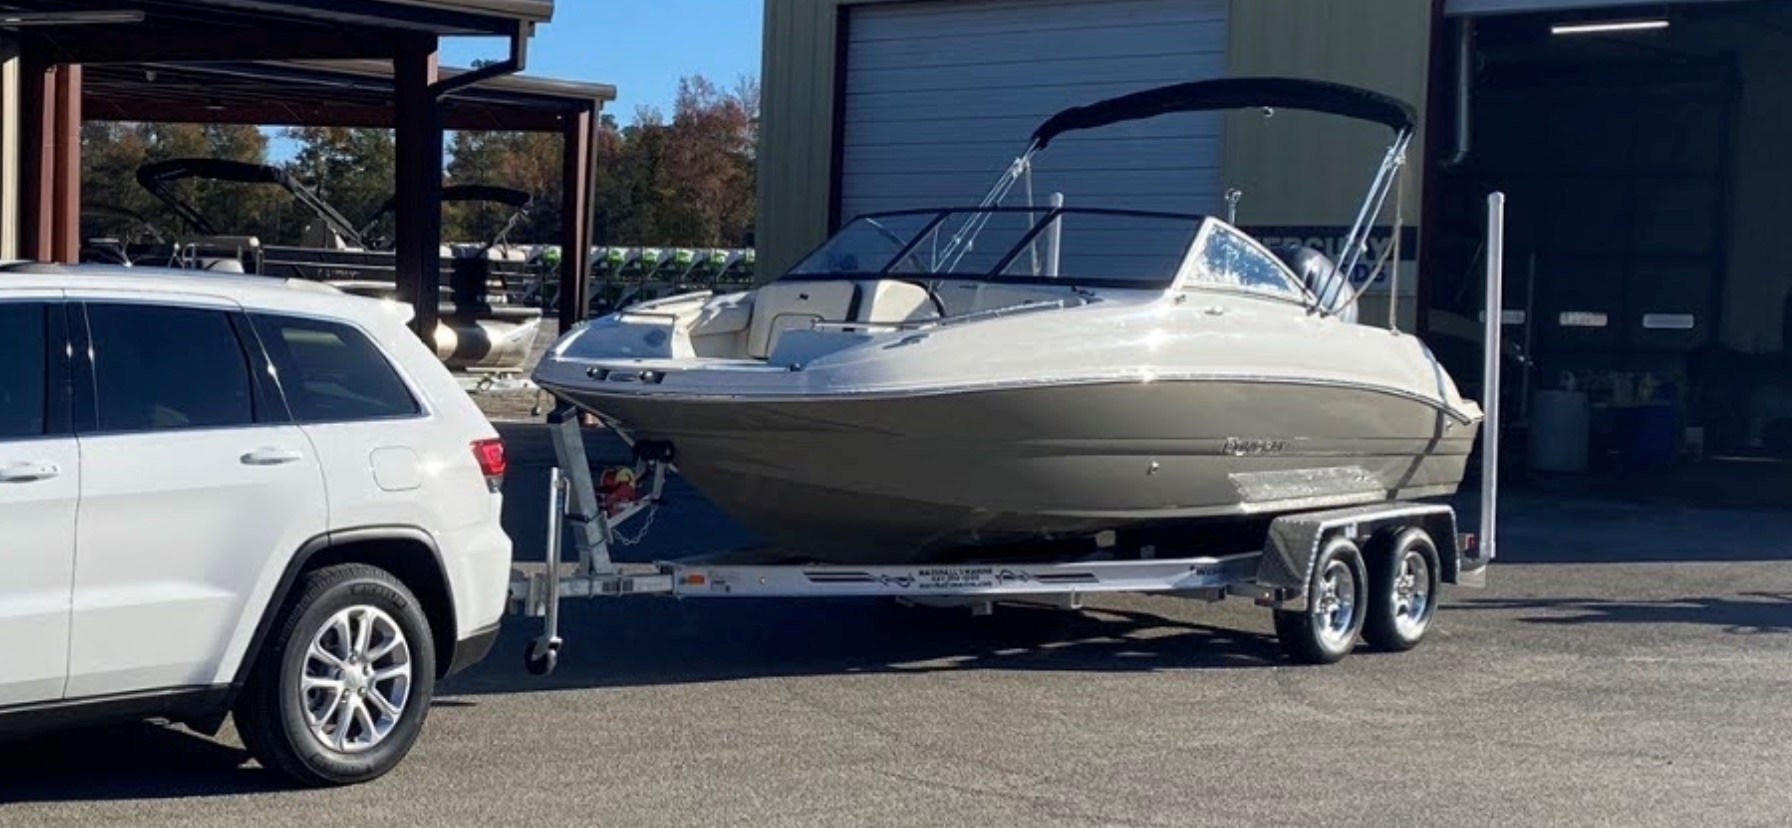 2022 Stingray 201DC Power boat for sale in Palm Coast, FL - image 22 